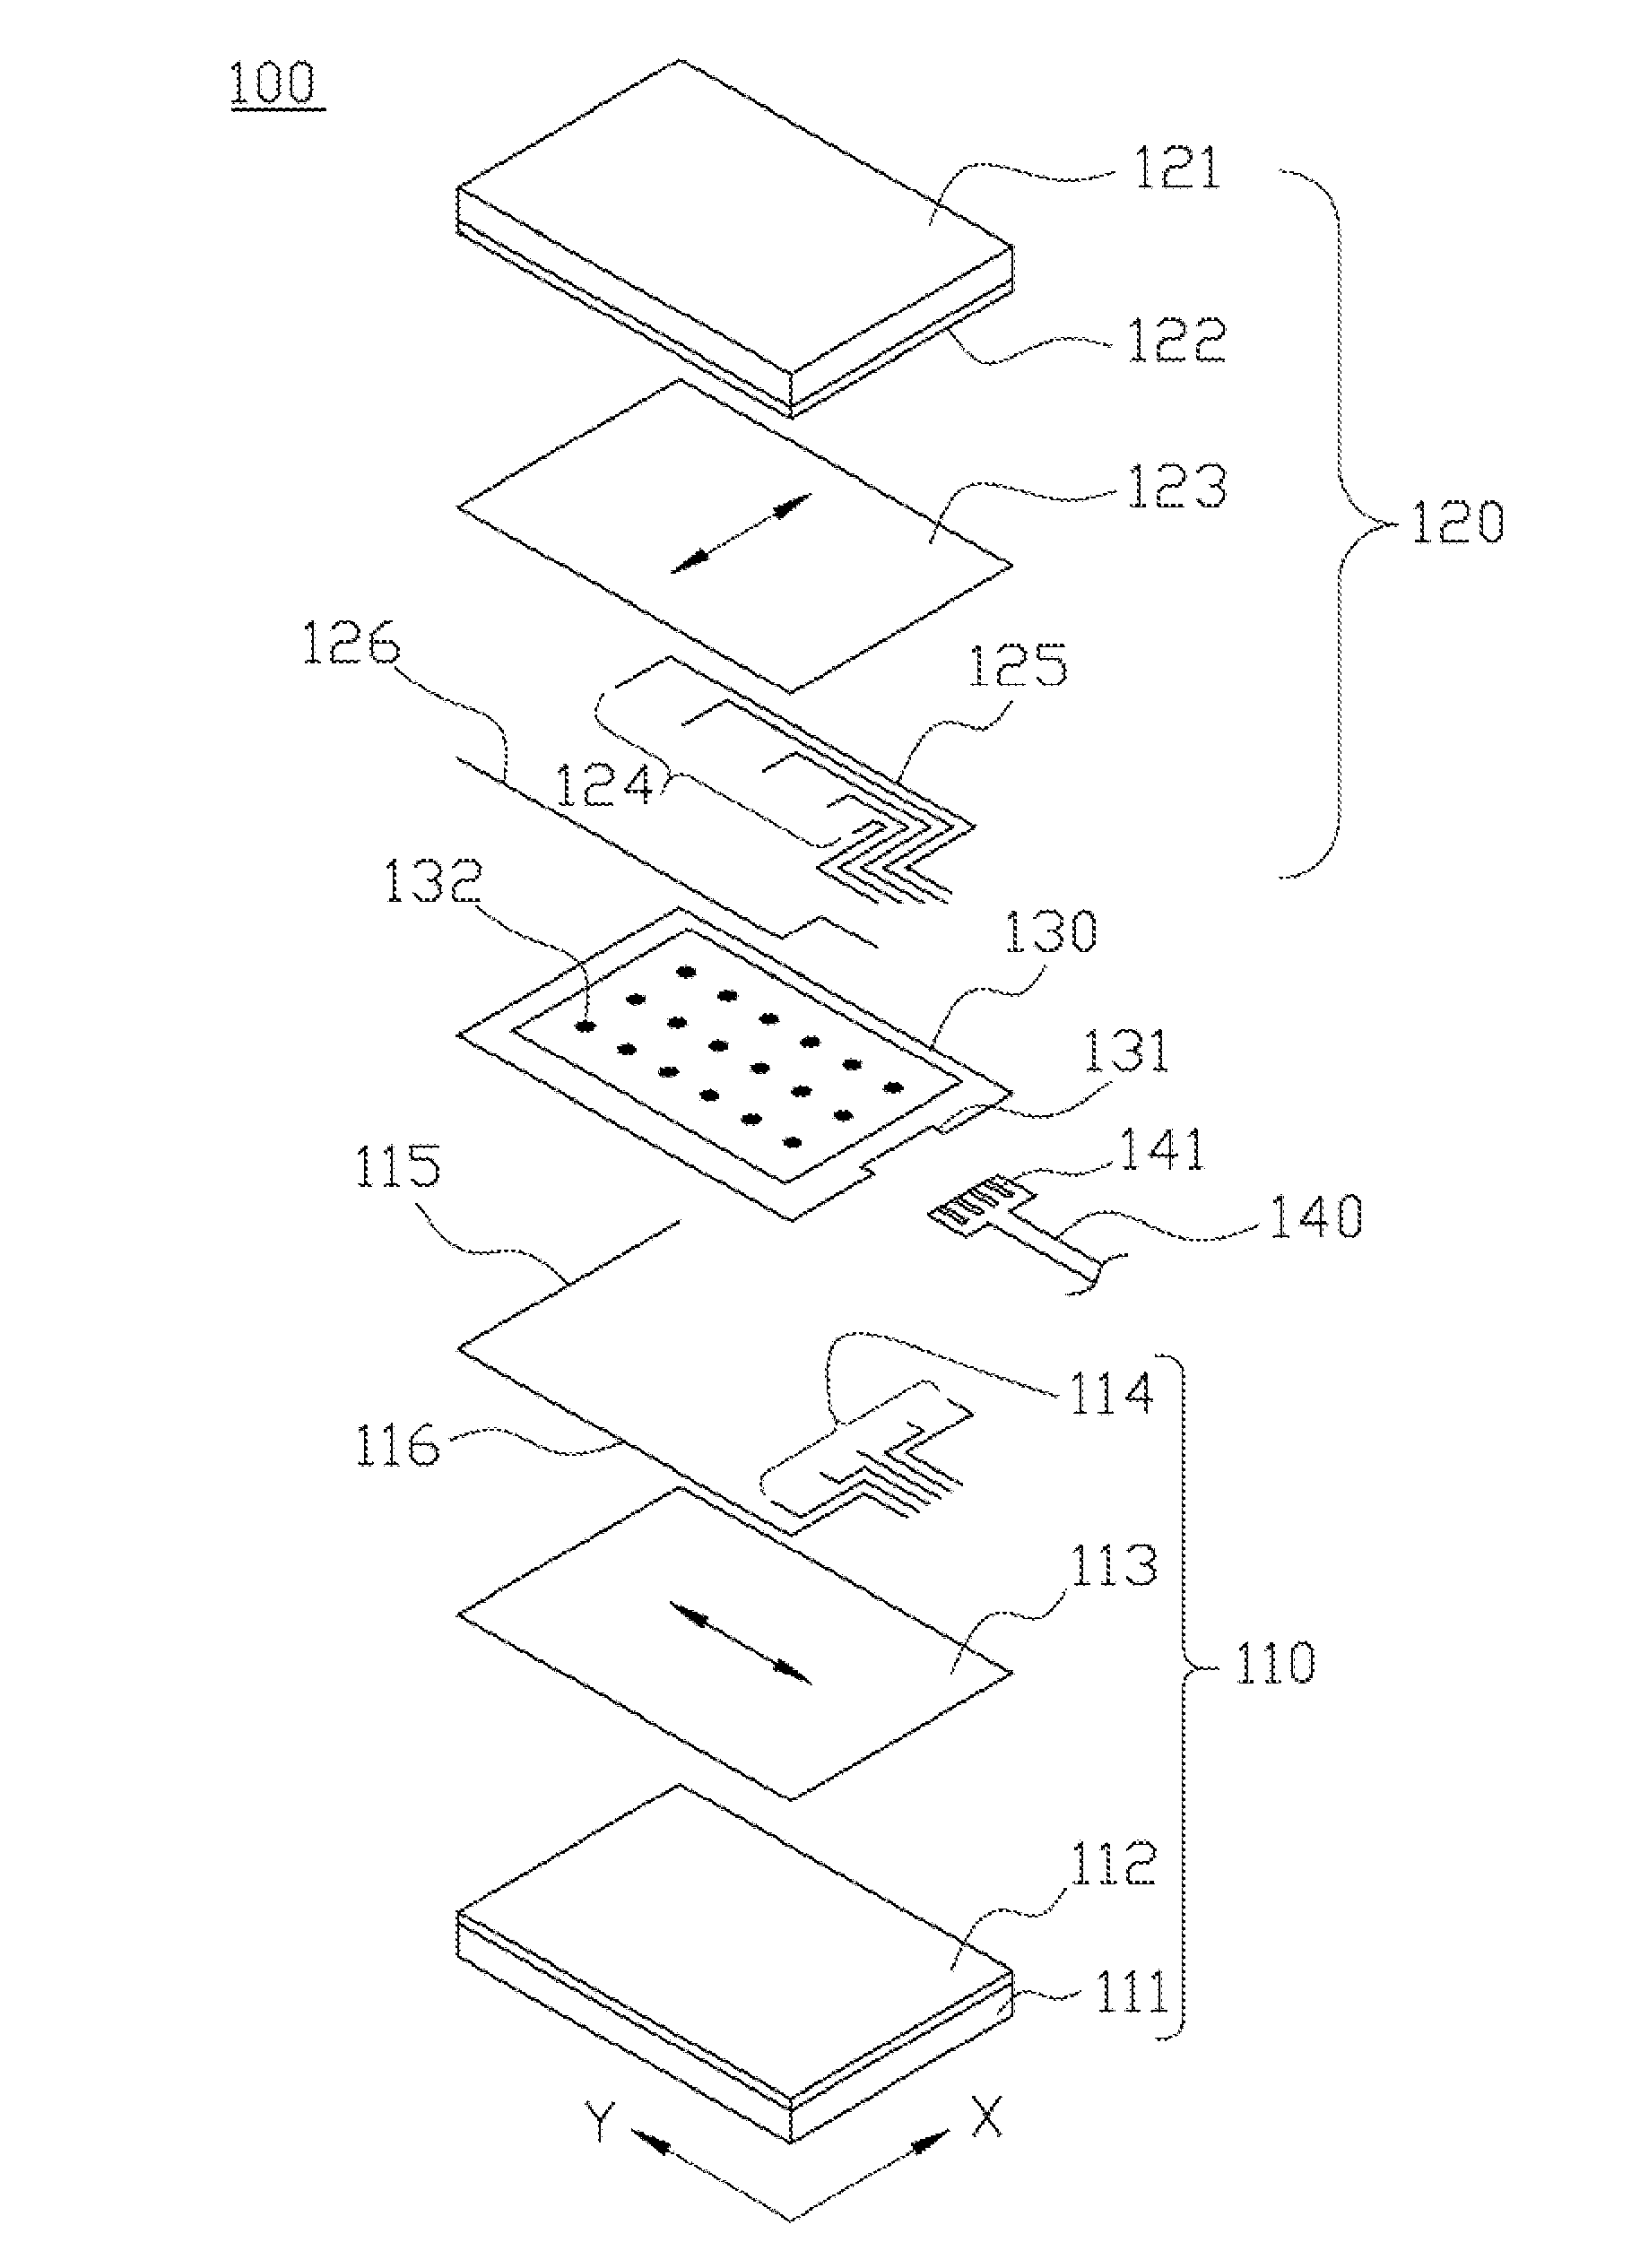 Multi-touch detecting method for detecting locations of touched points on a touch panel